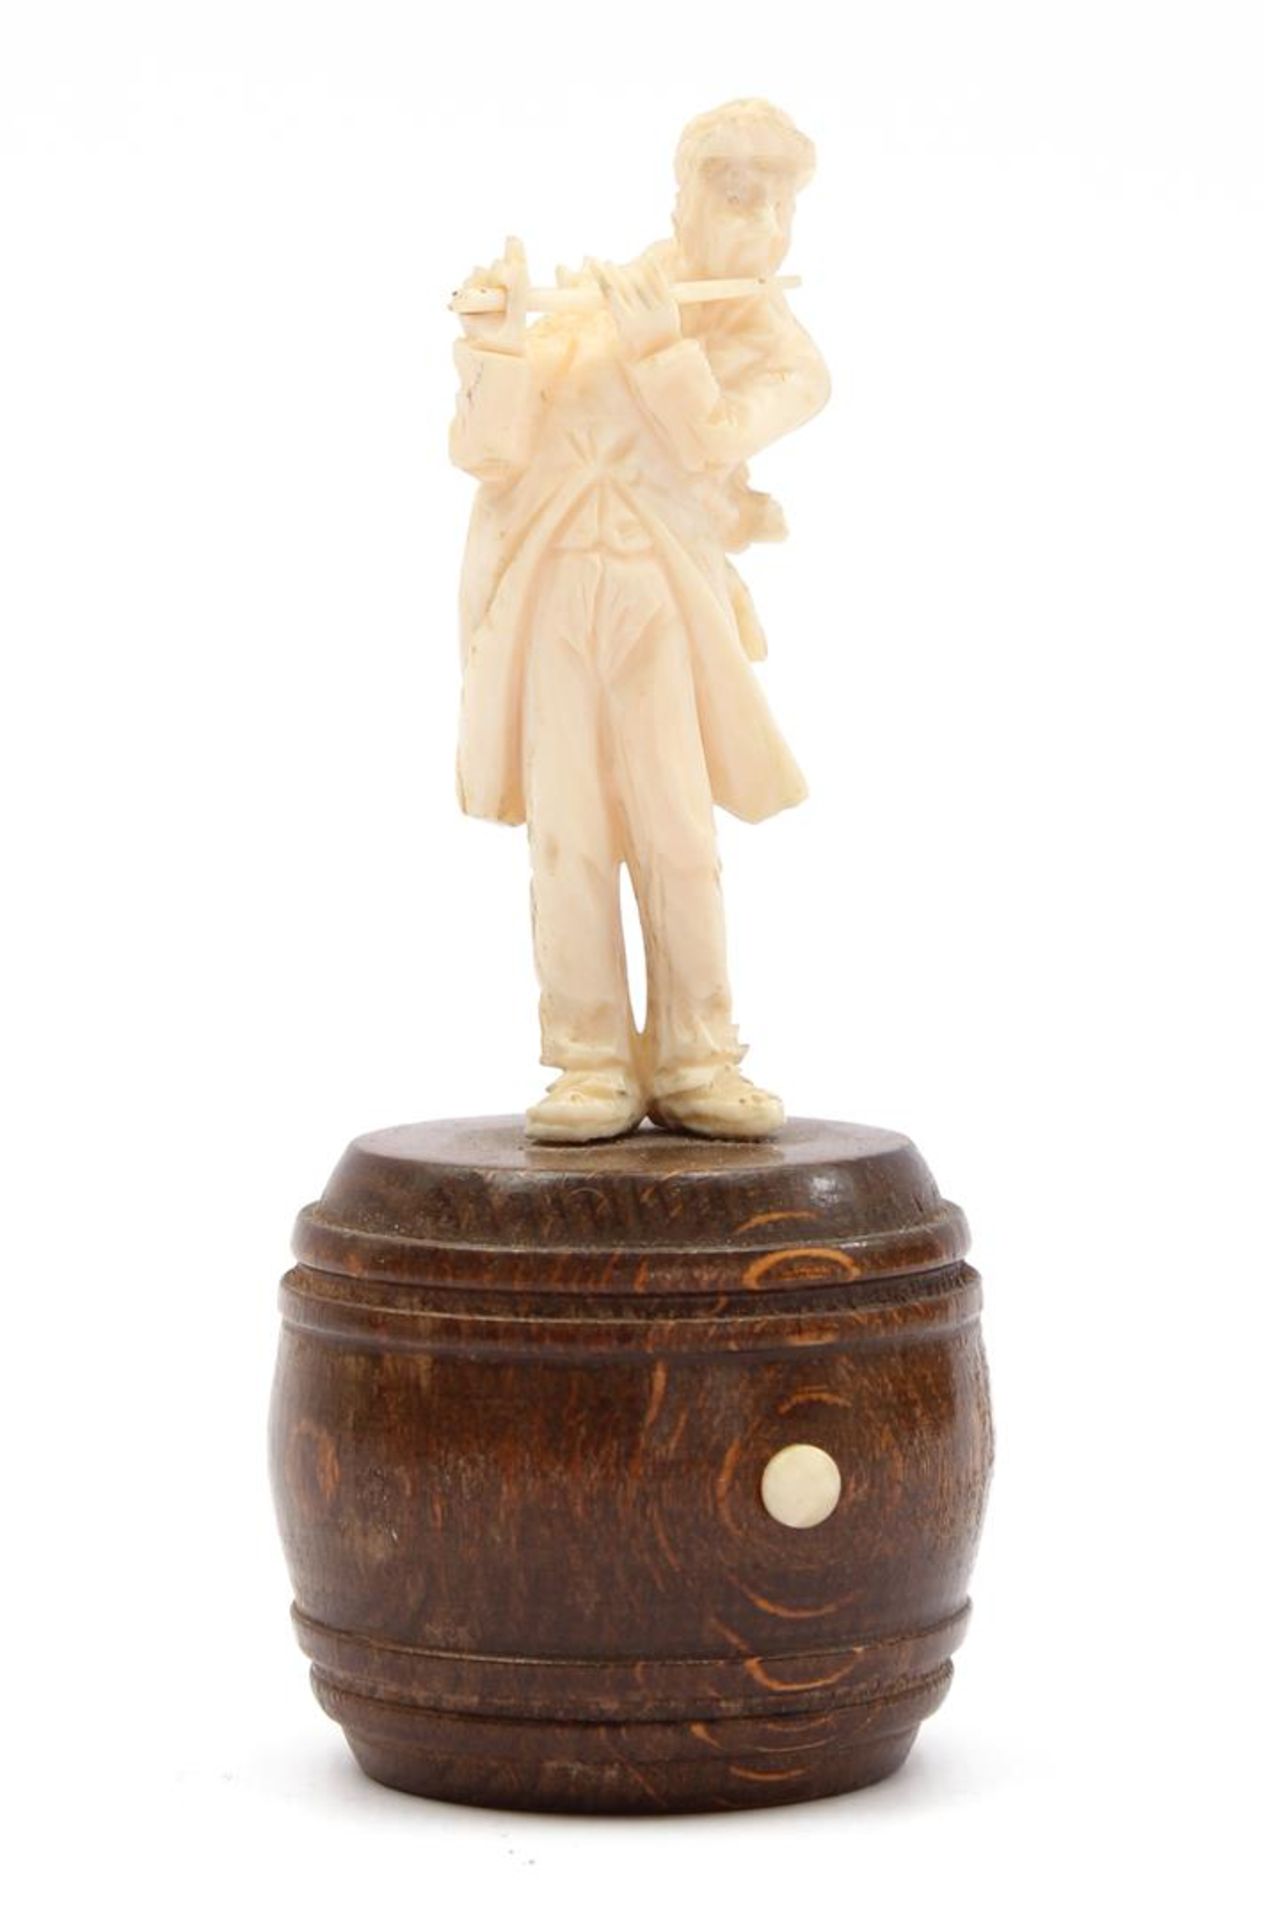 Richly carved ivory figurine of a man